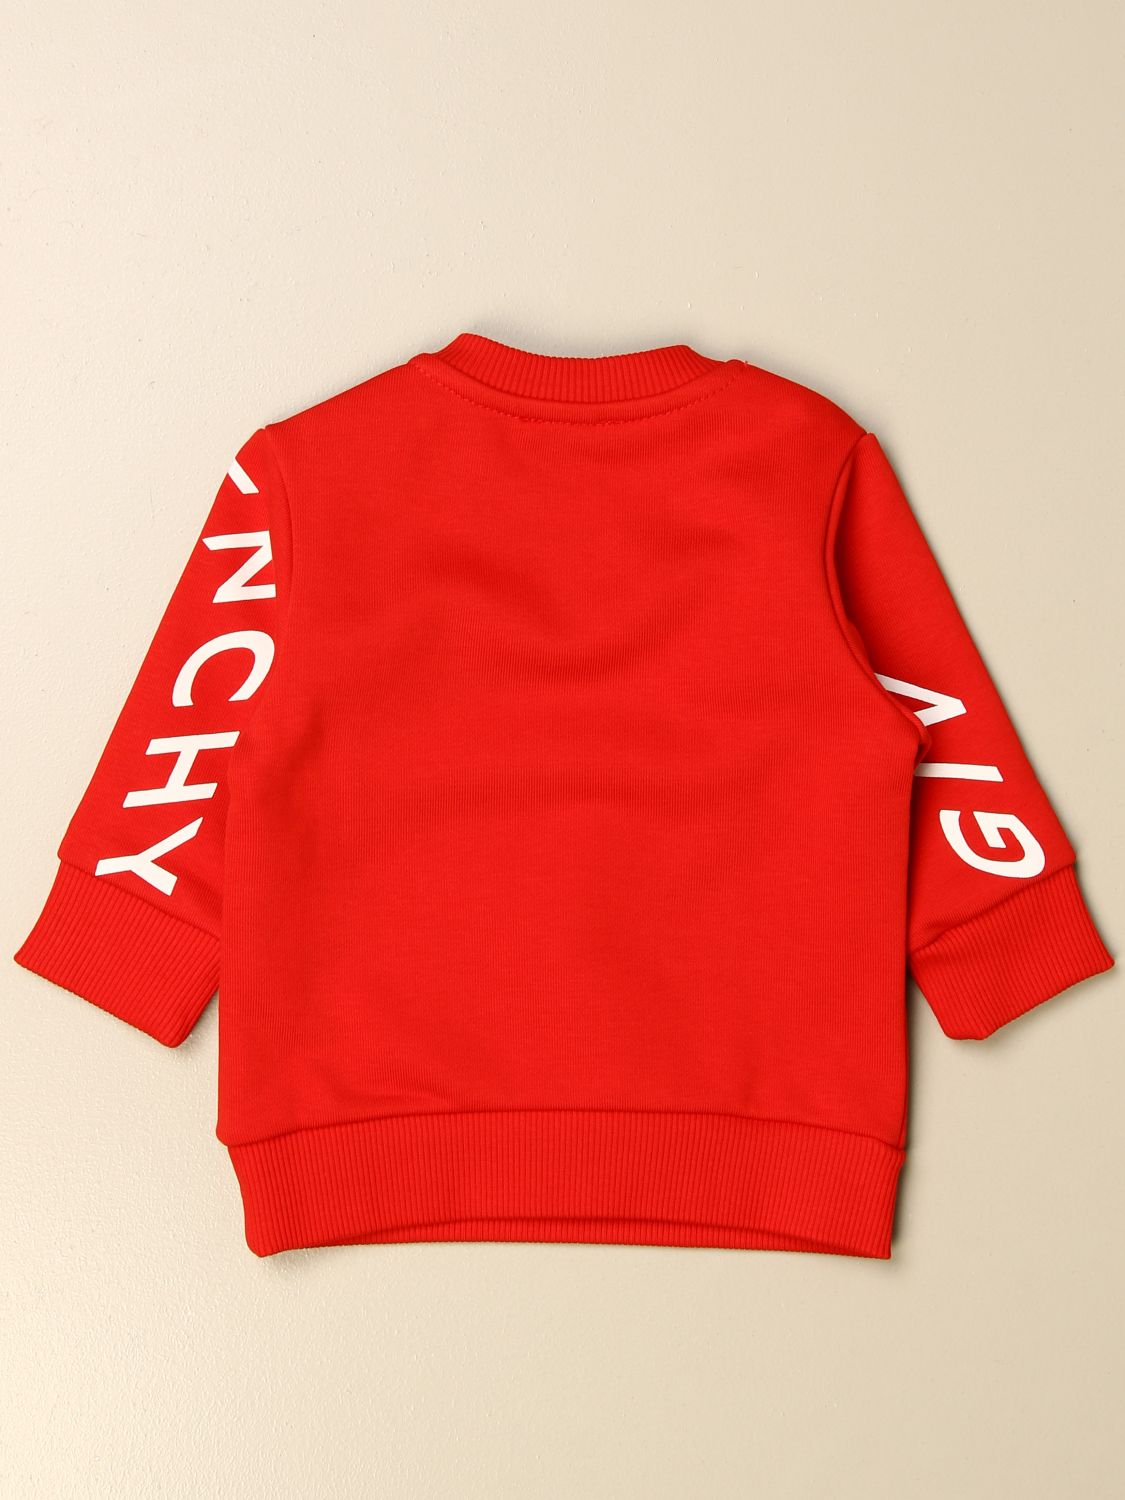 givenchy crewneck red